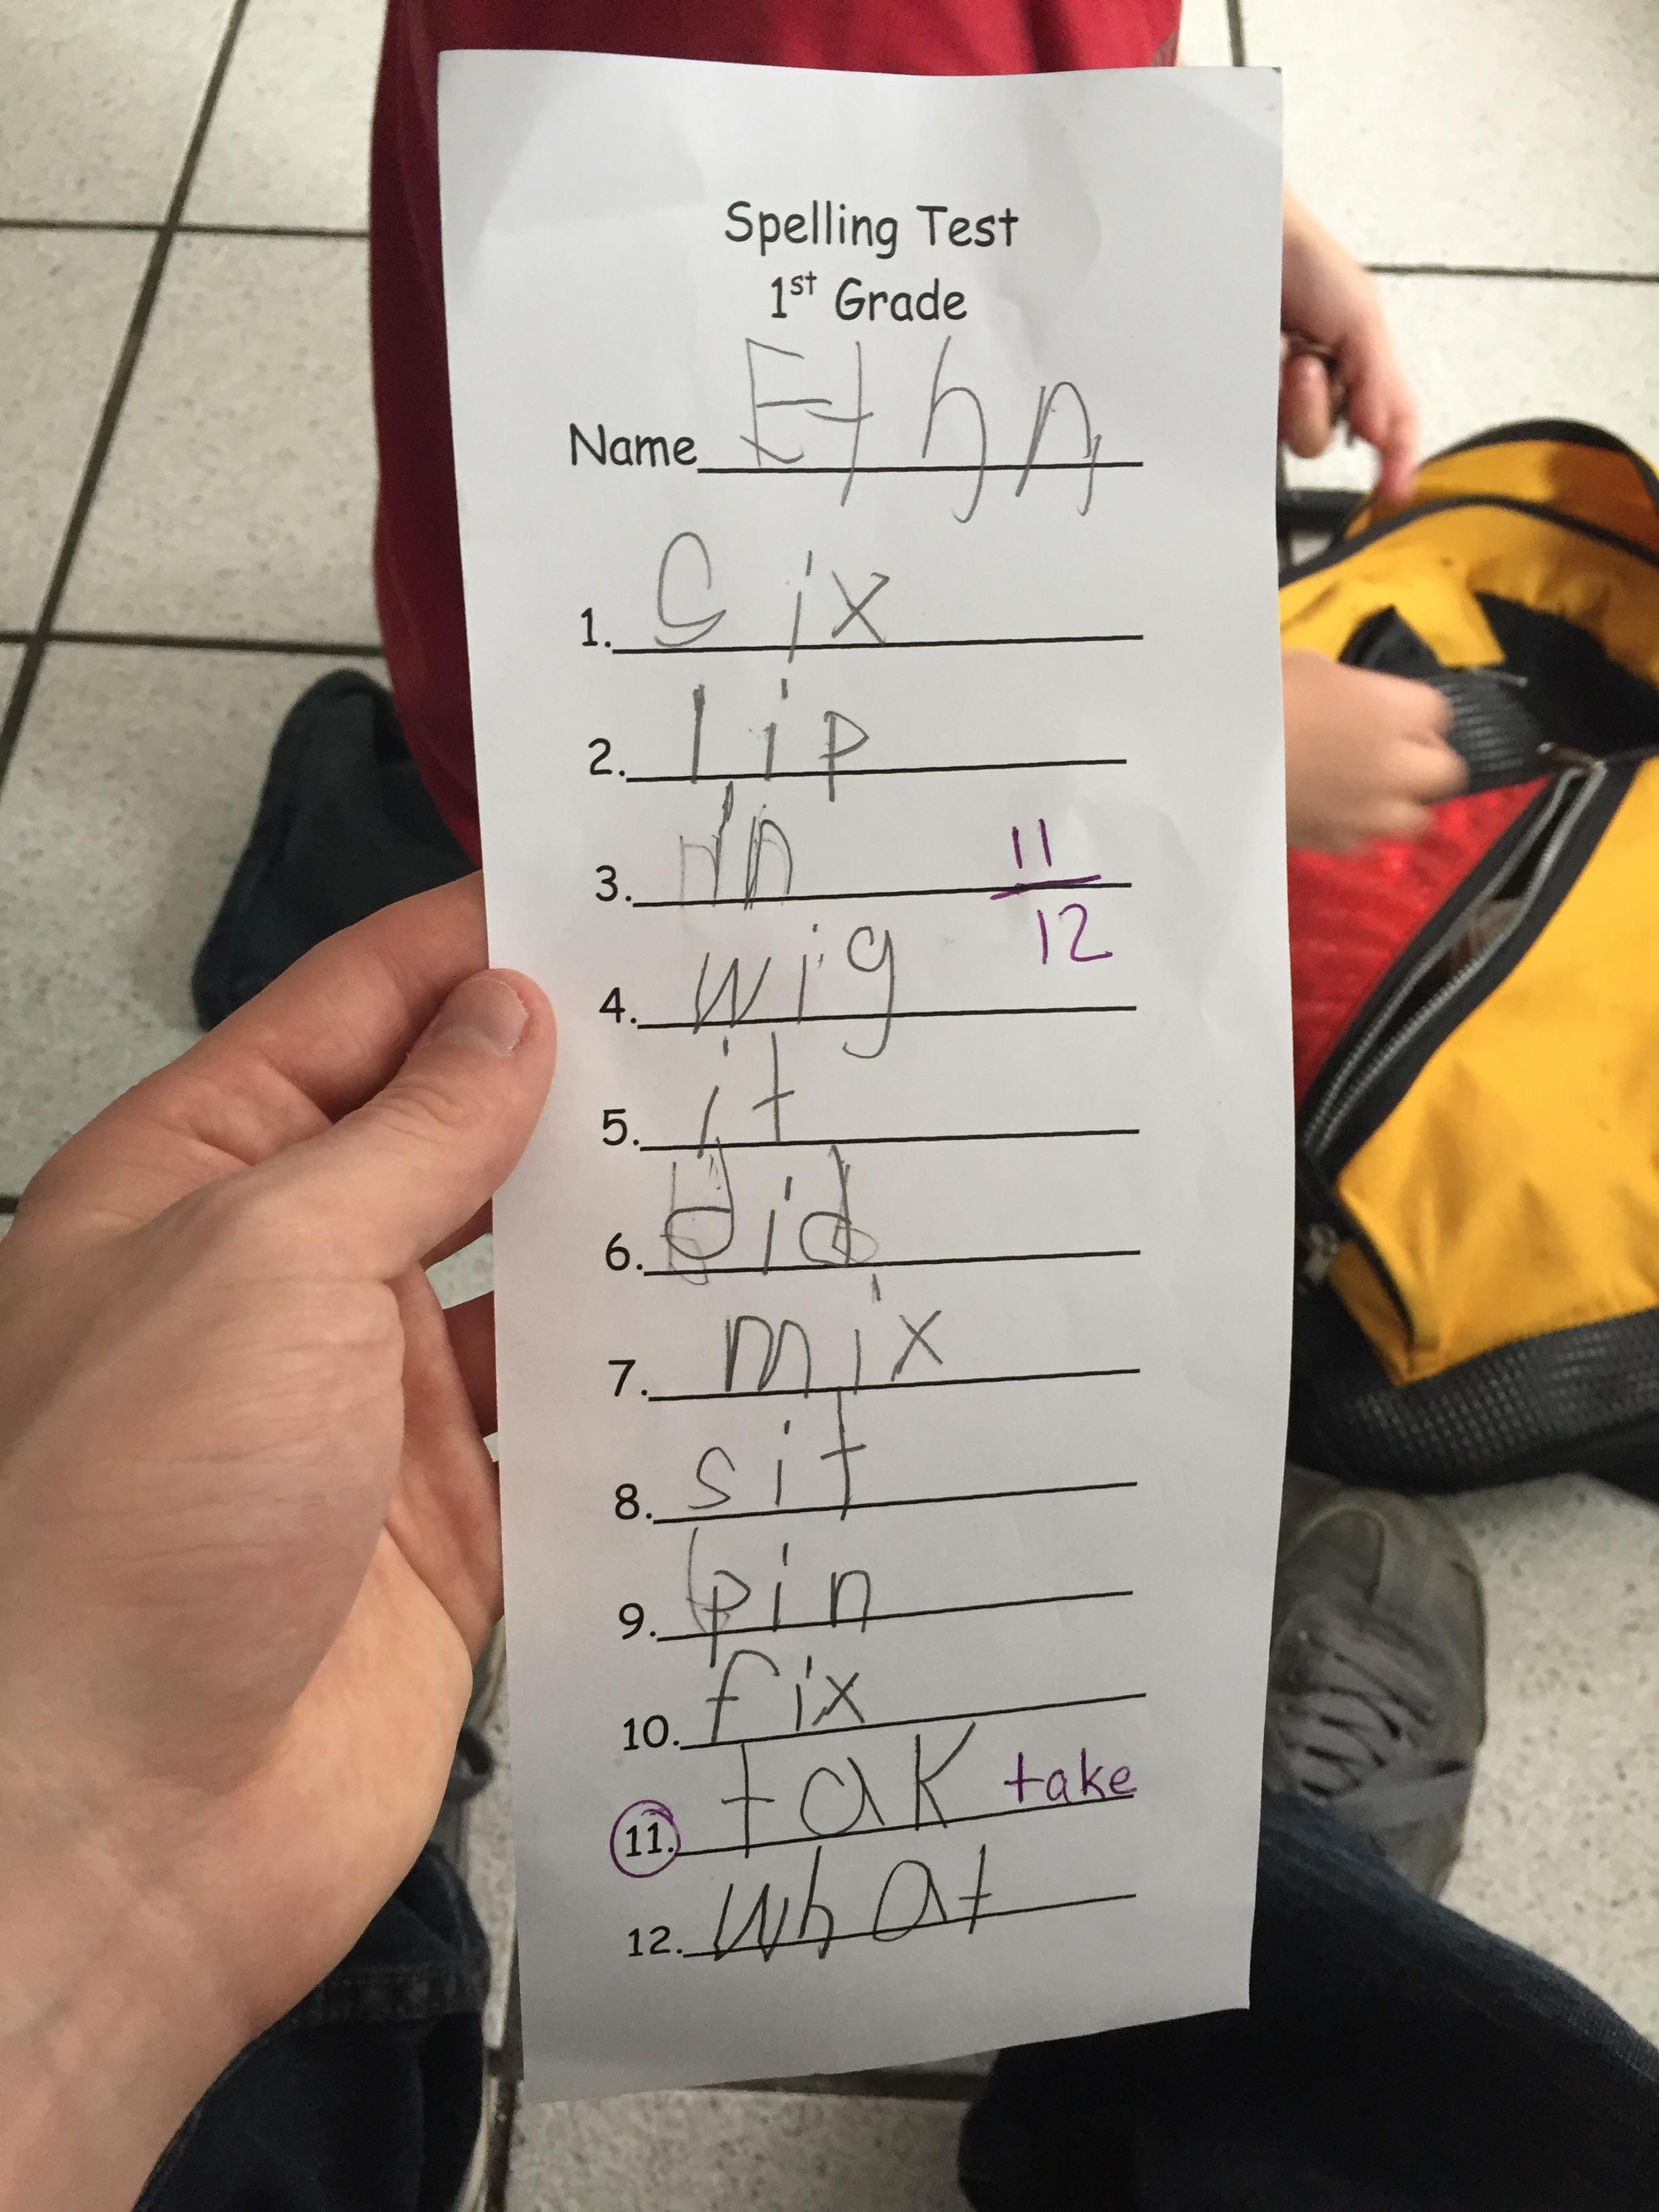 My cousin Ethan got an 11/12 on his spelling test, but spelled his name wrong.